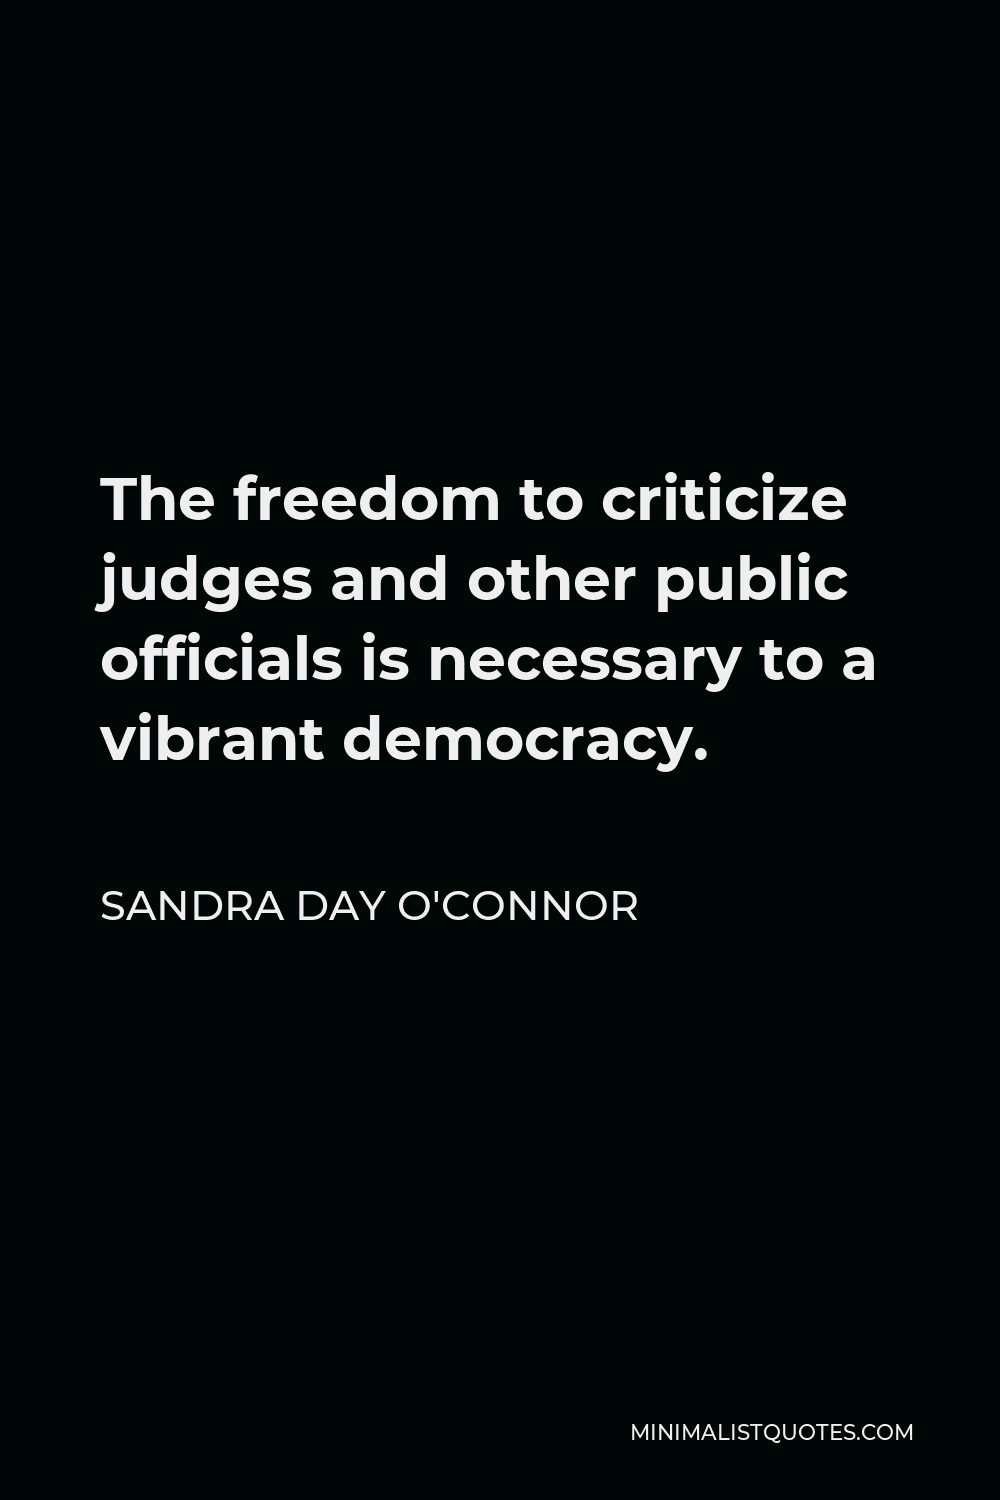 Sandra Day O'Connor Quote - The freedom to criticize judges and other public officials is necessary to a vibrant democracy.